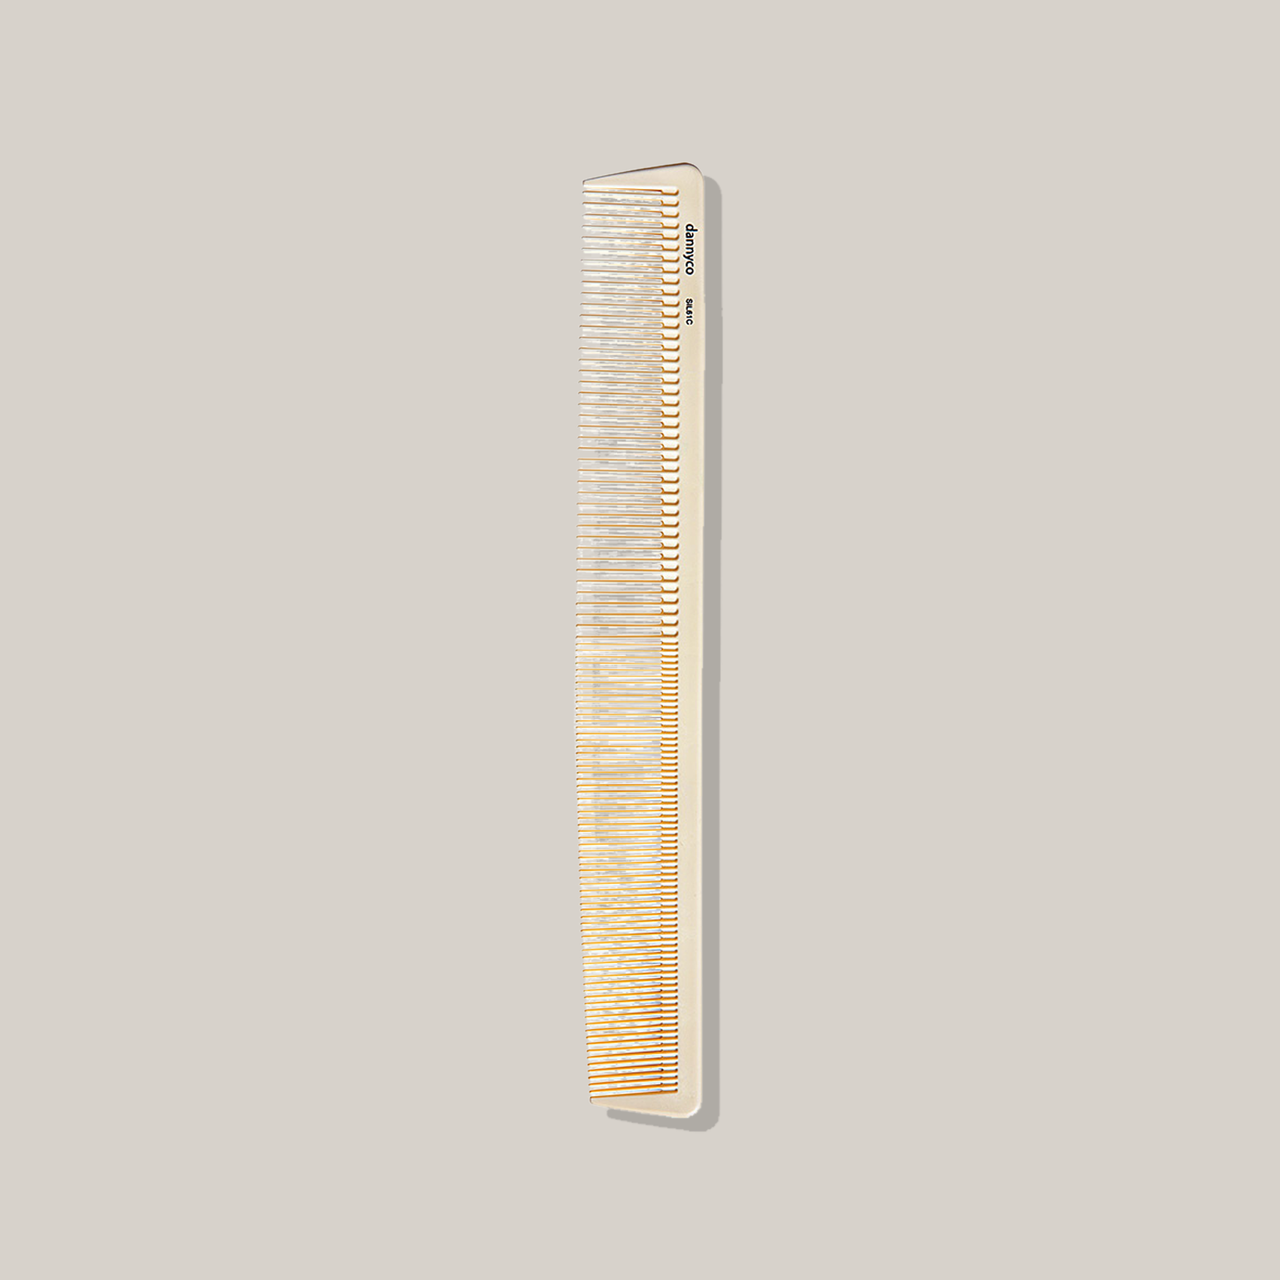 Dannyco Fine Tooth Comb F752/SIL61C 